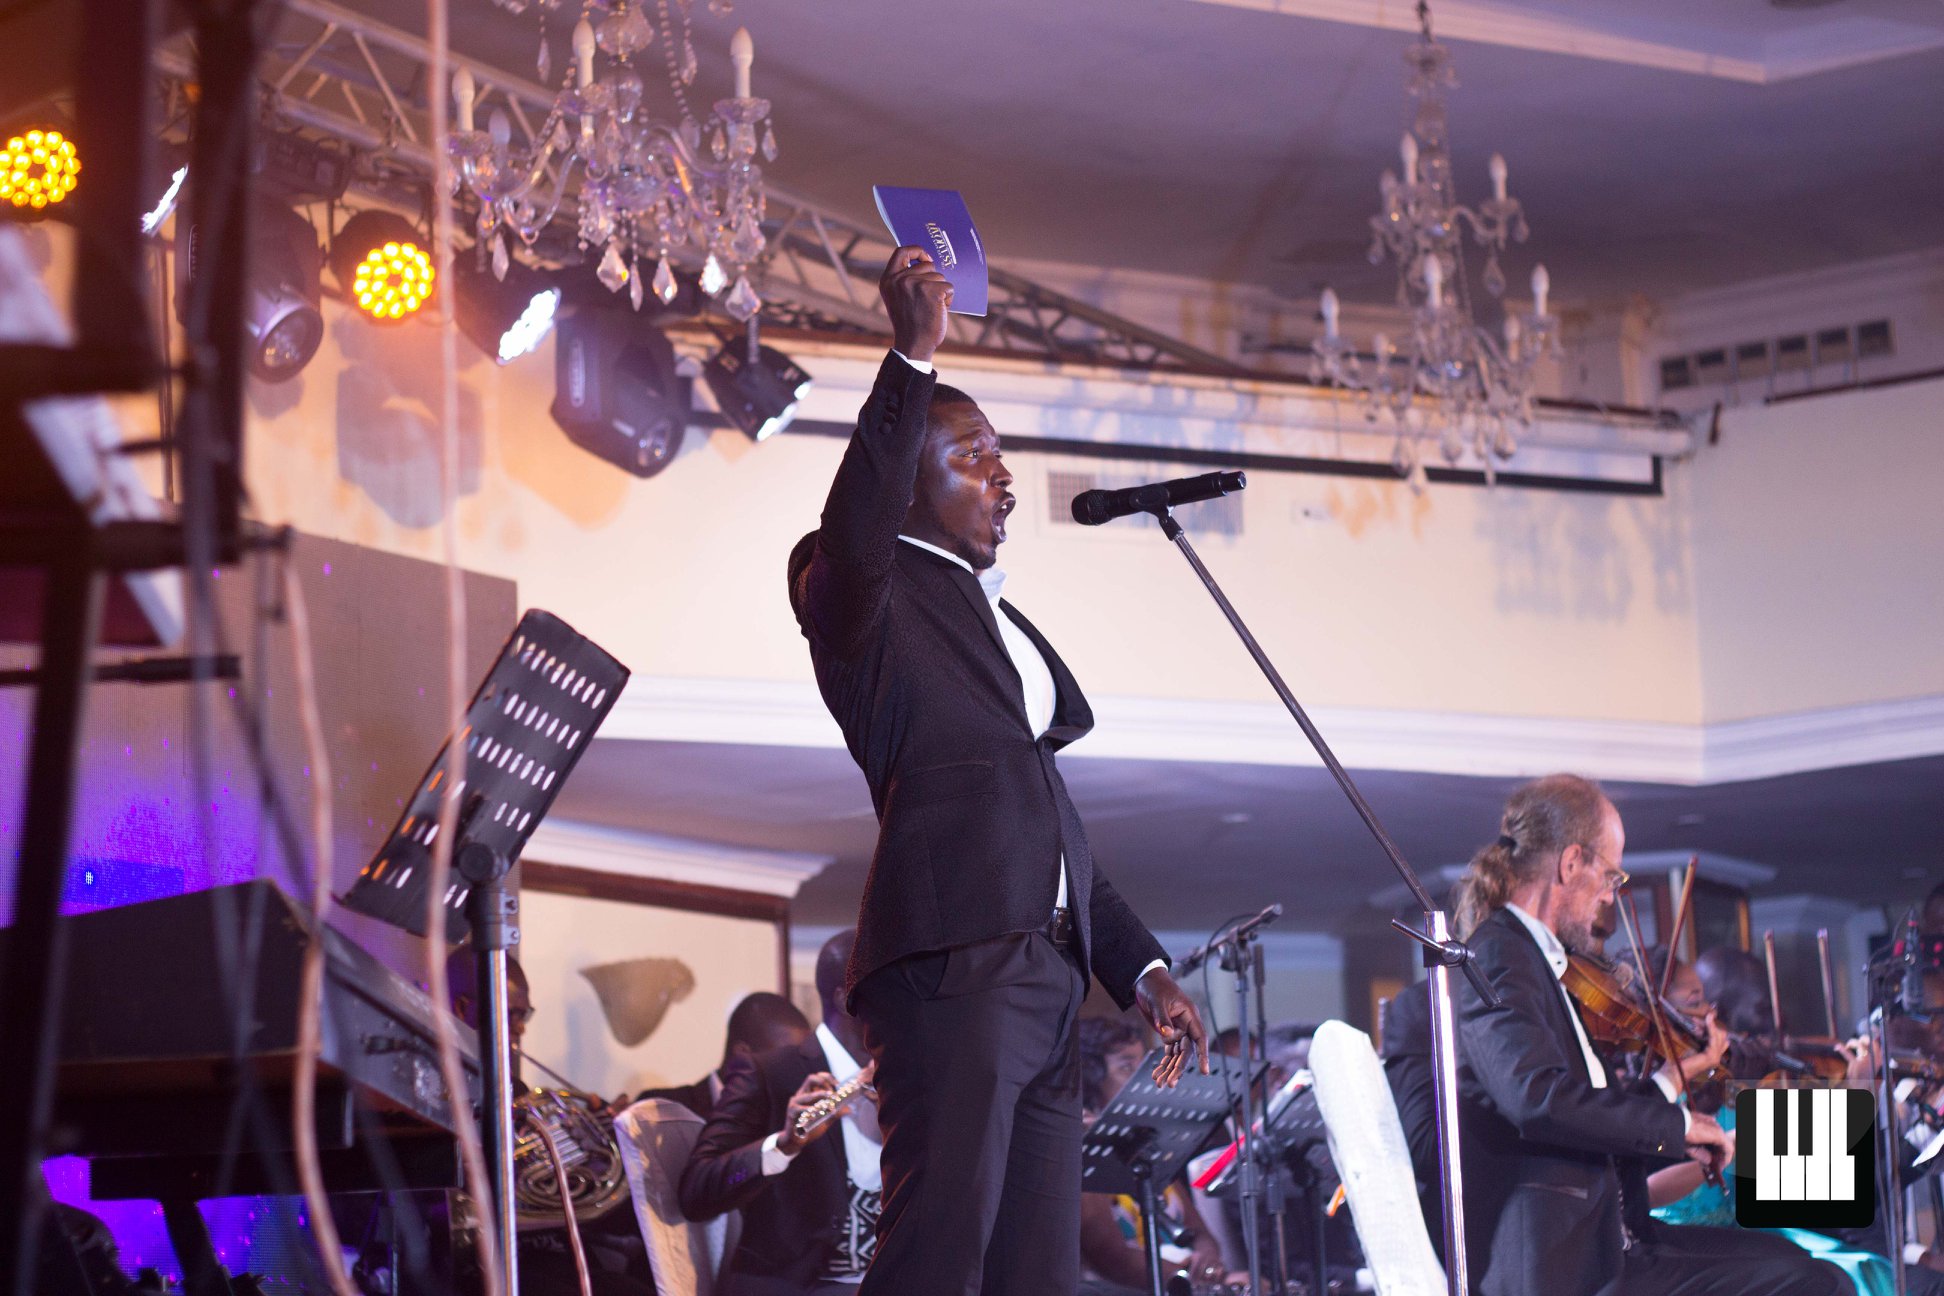 Look Back: The Accra Symphony Orchestra's Sixth Anniversary Concert Jesse was present at the exclusive anniversary concert celebrating six years of Lumina and the Accra Symphony Orchestra.